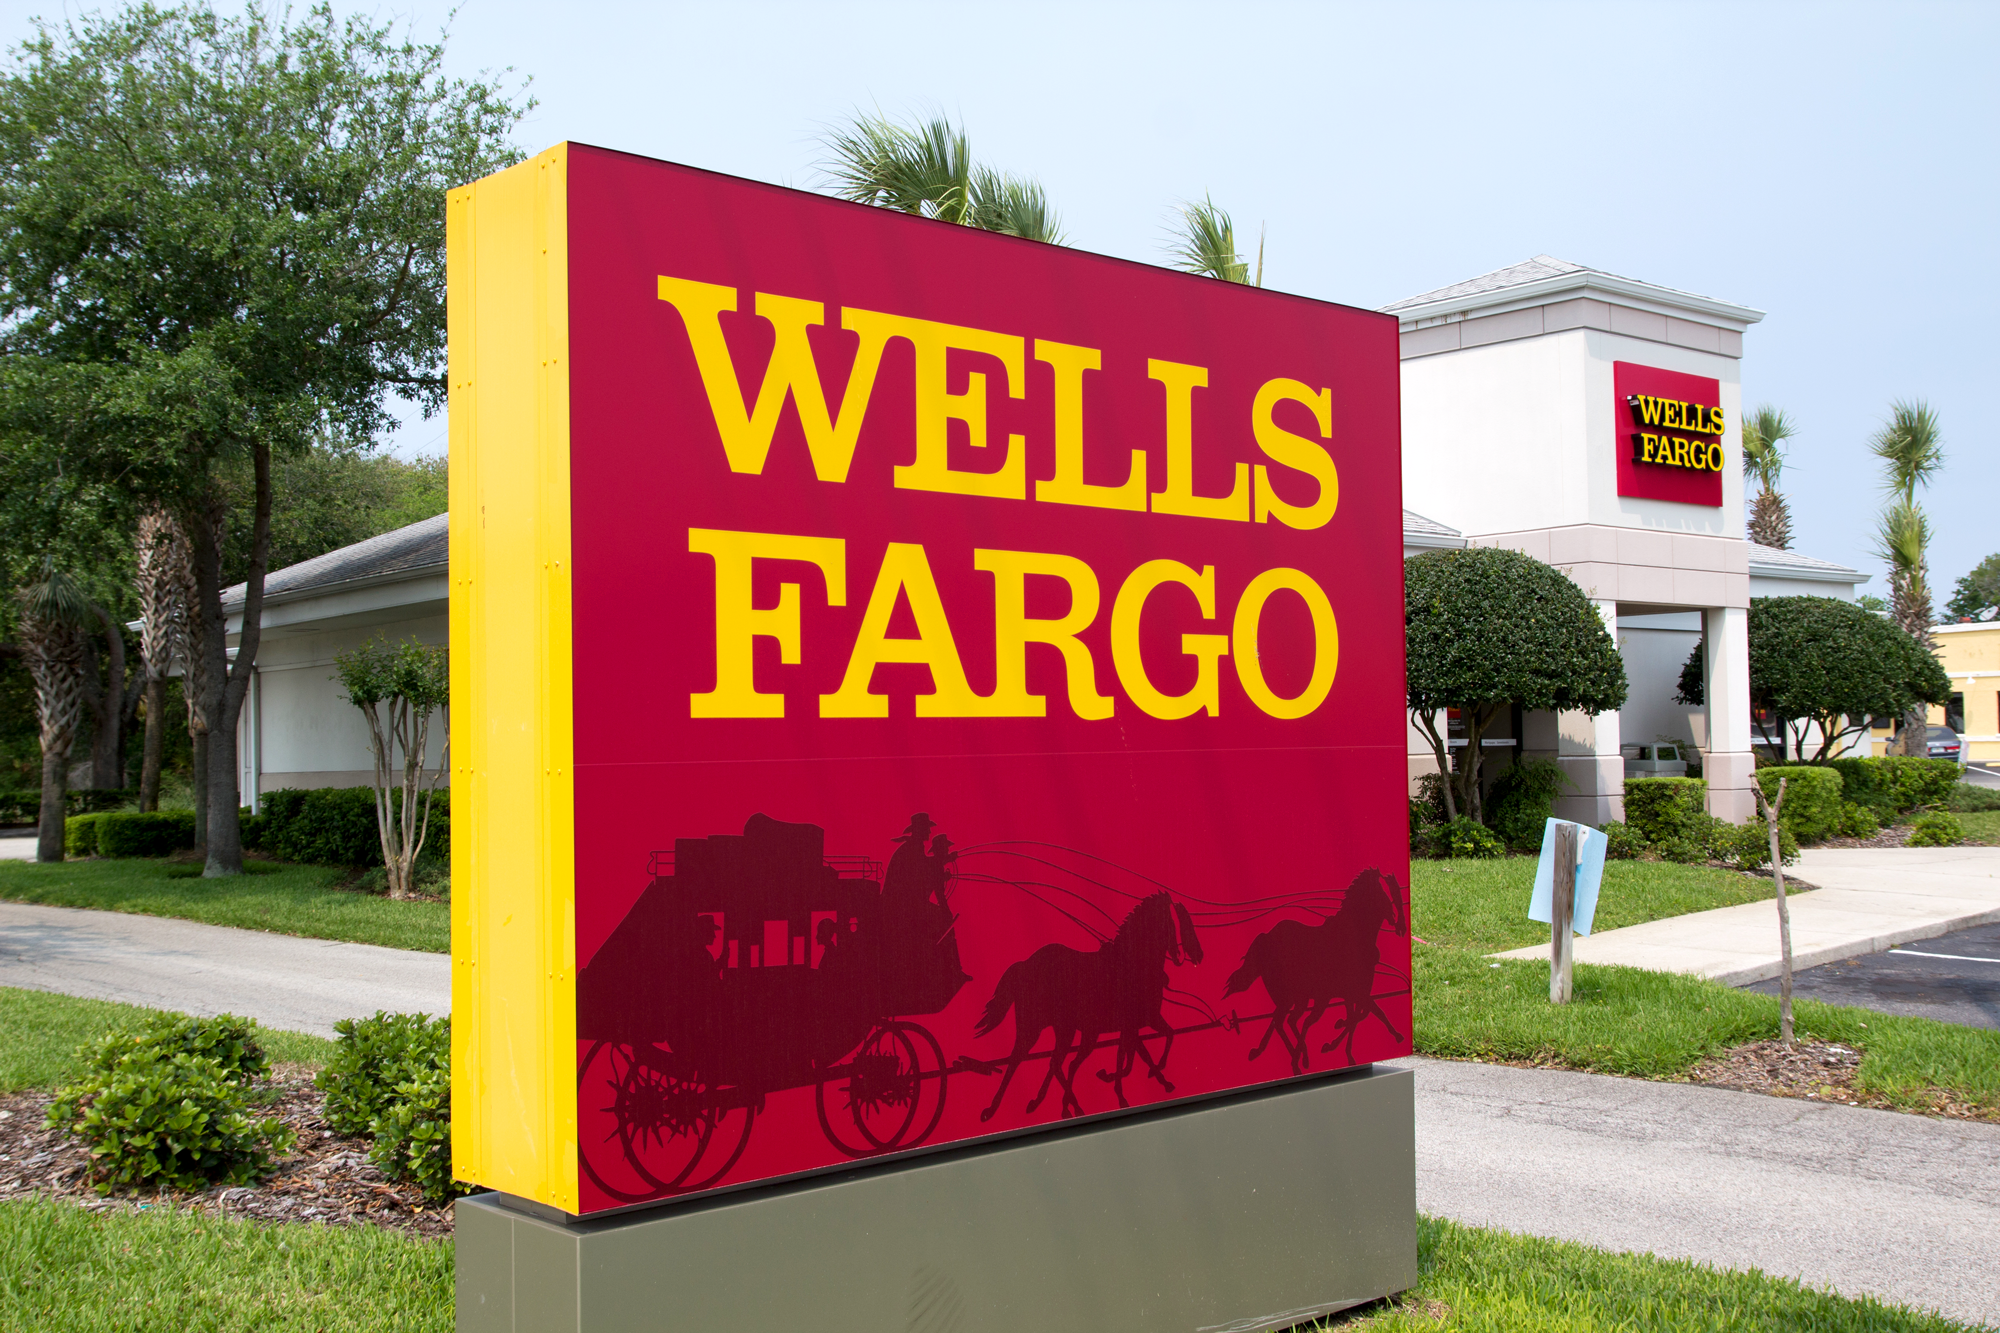 Wells Fargo has become the leading bank in home mortgages. (Photo: Shutterstock)